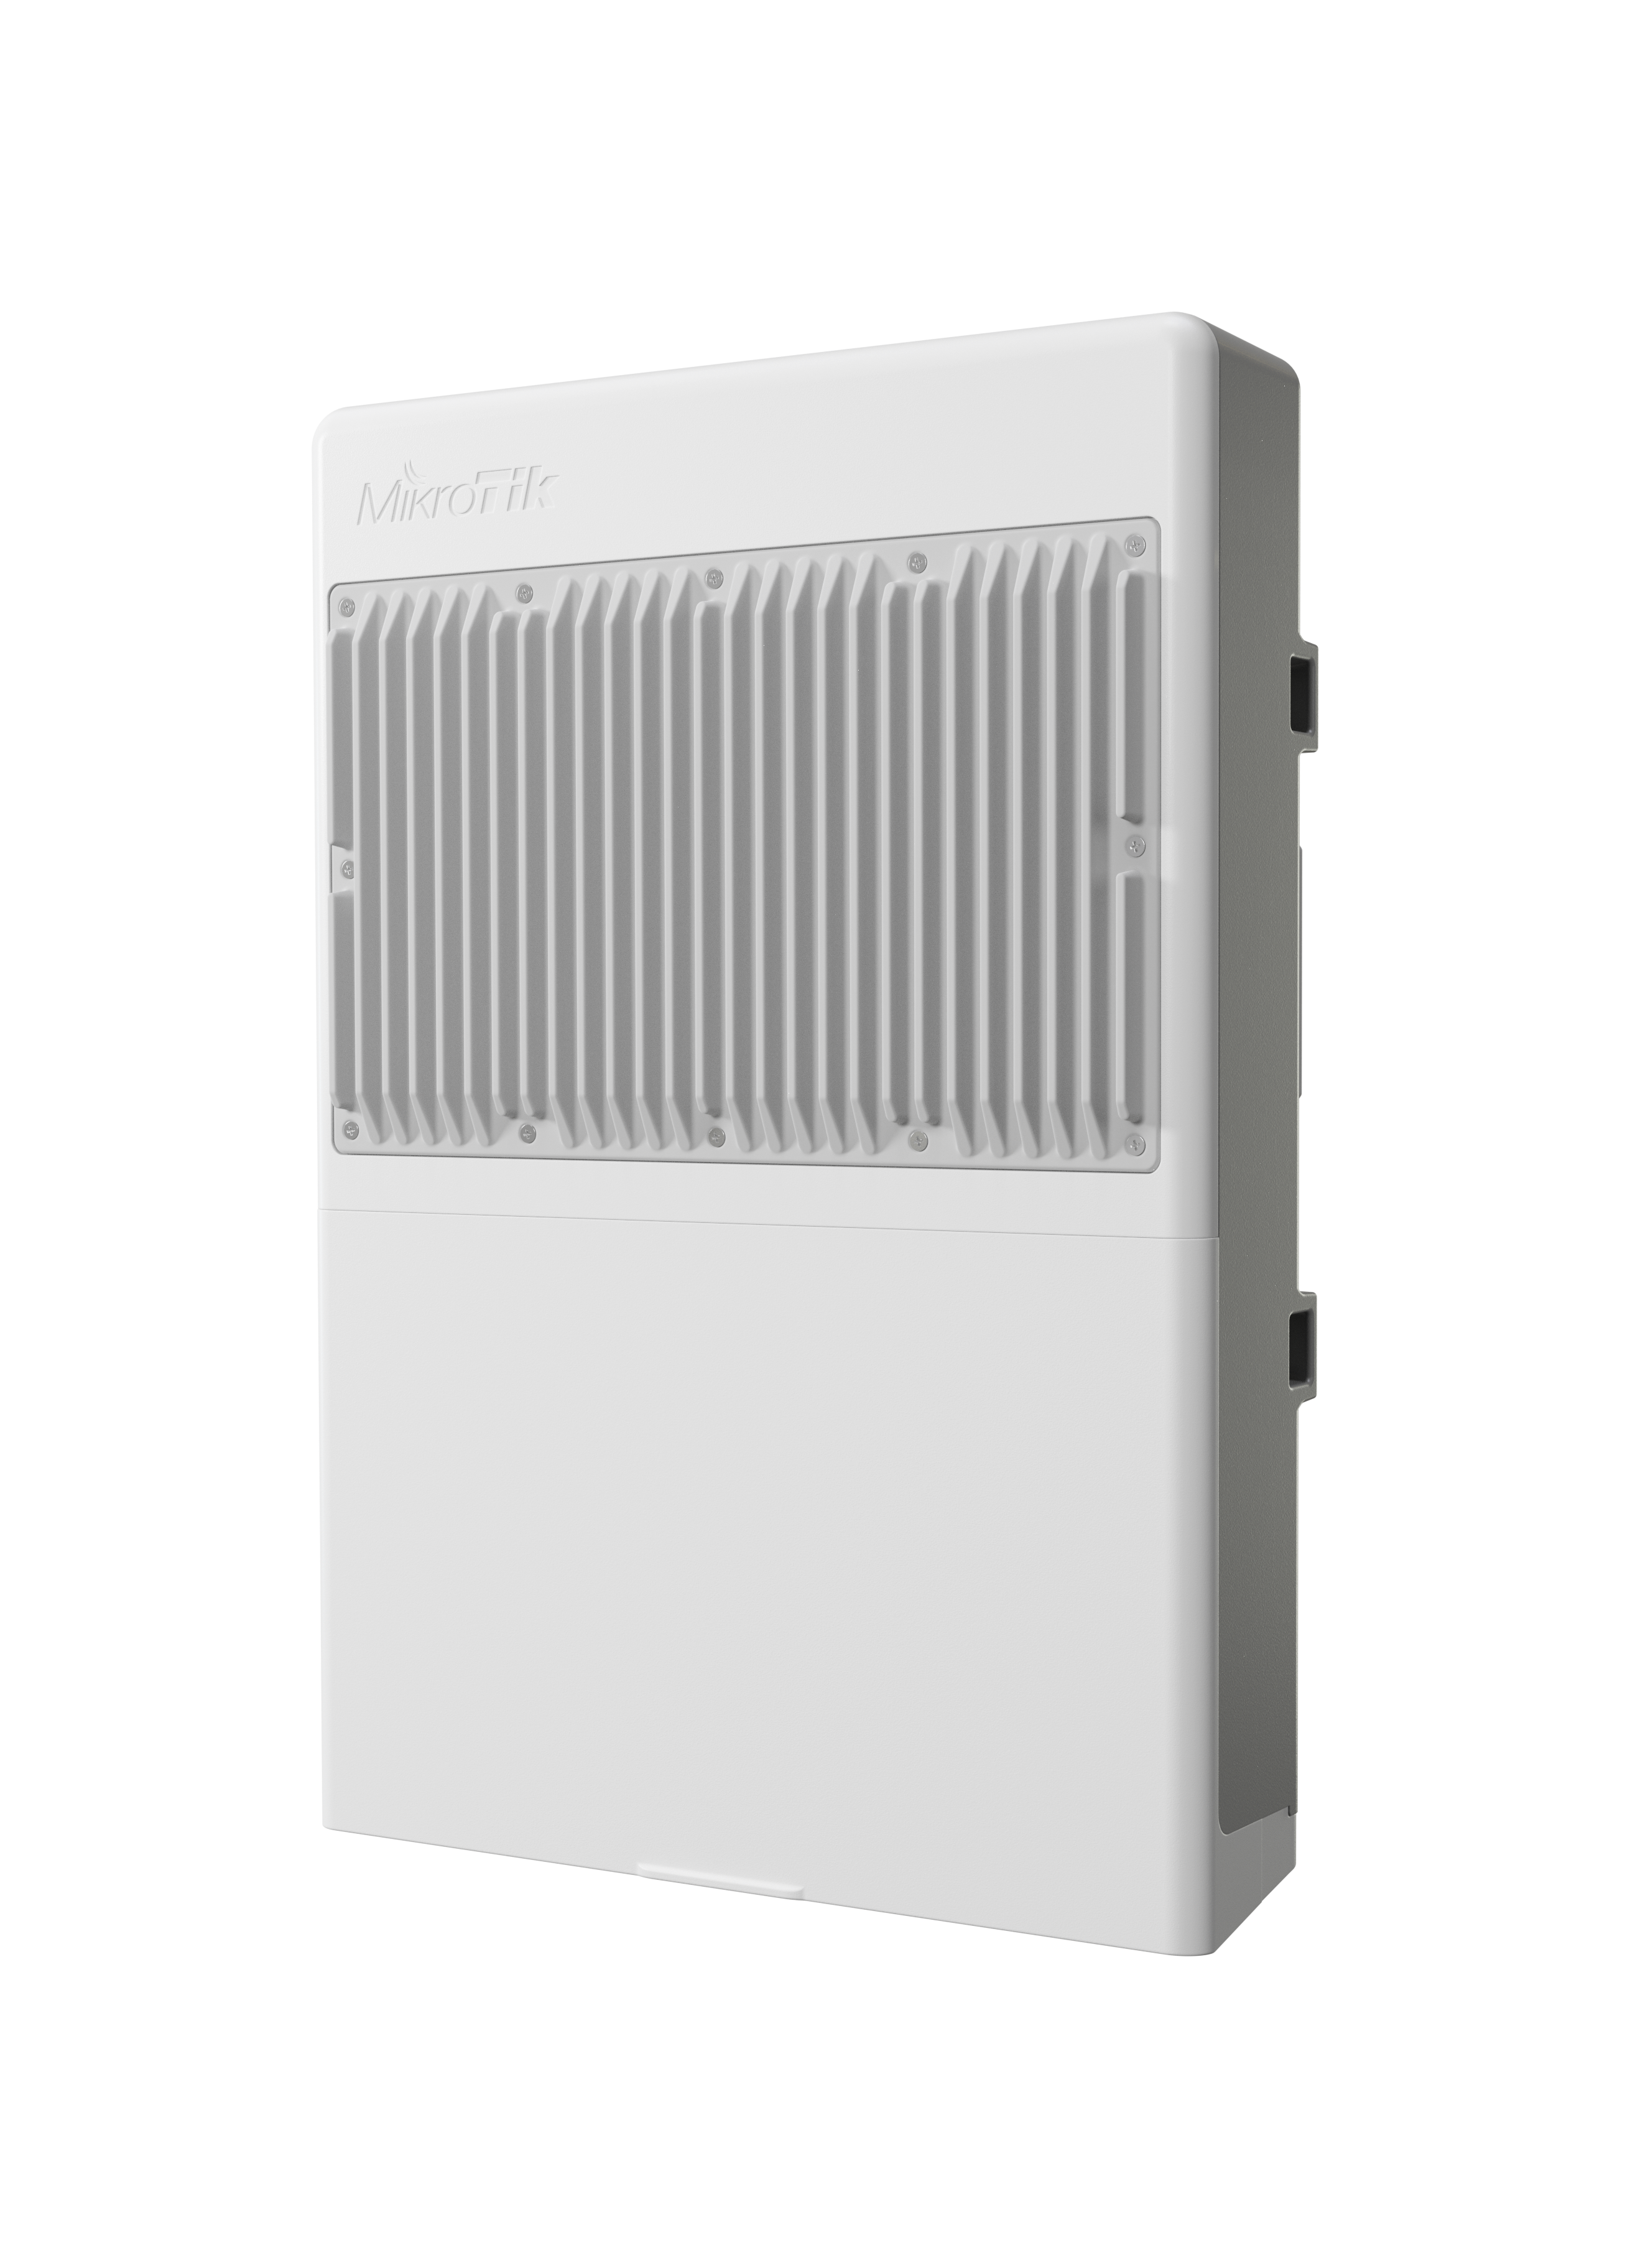 Mikrotik Netpower 16p-CRS318-16P-2S+OUT An outdoor 18 port switch with 16 Gigabit PoE-out ports and